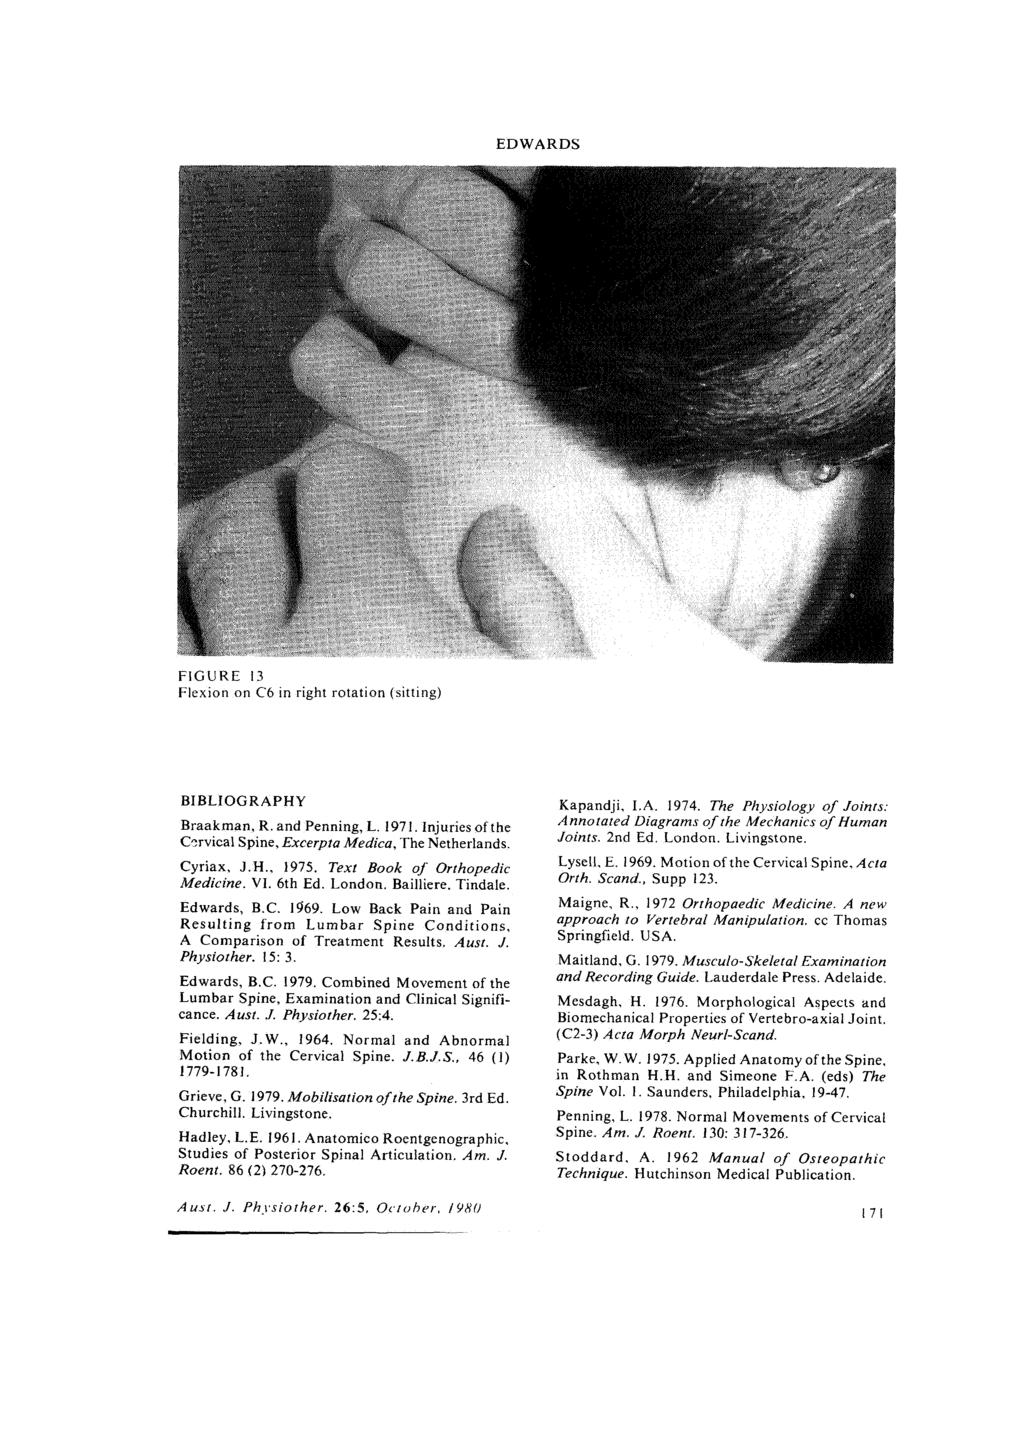 EDWARDS FIGURE 1.3 Flexion on C6 in right rotation (sitting) BIBLIOGRAPHY Braakman, R. and Penning, L. 1971. Injuries of the Cervical Spine, Excerpta Medica, The Netherlands. Cyriax, J.H., 1975.